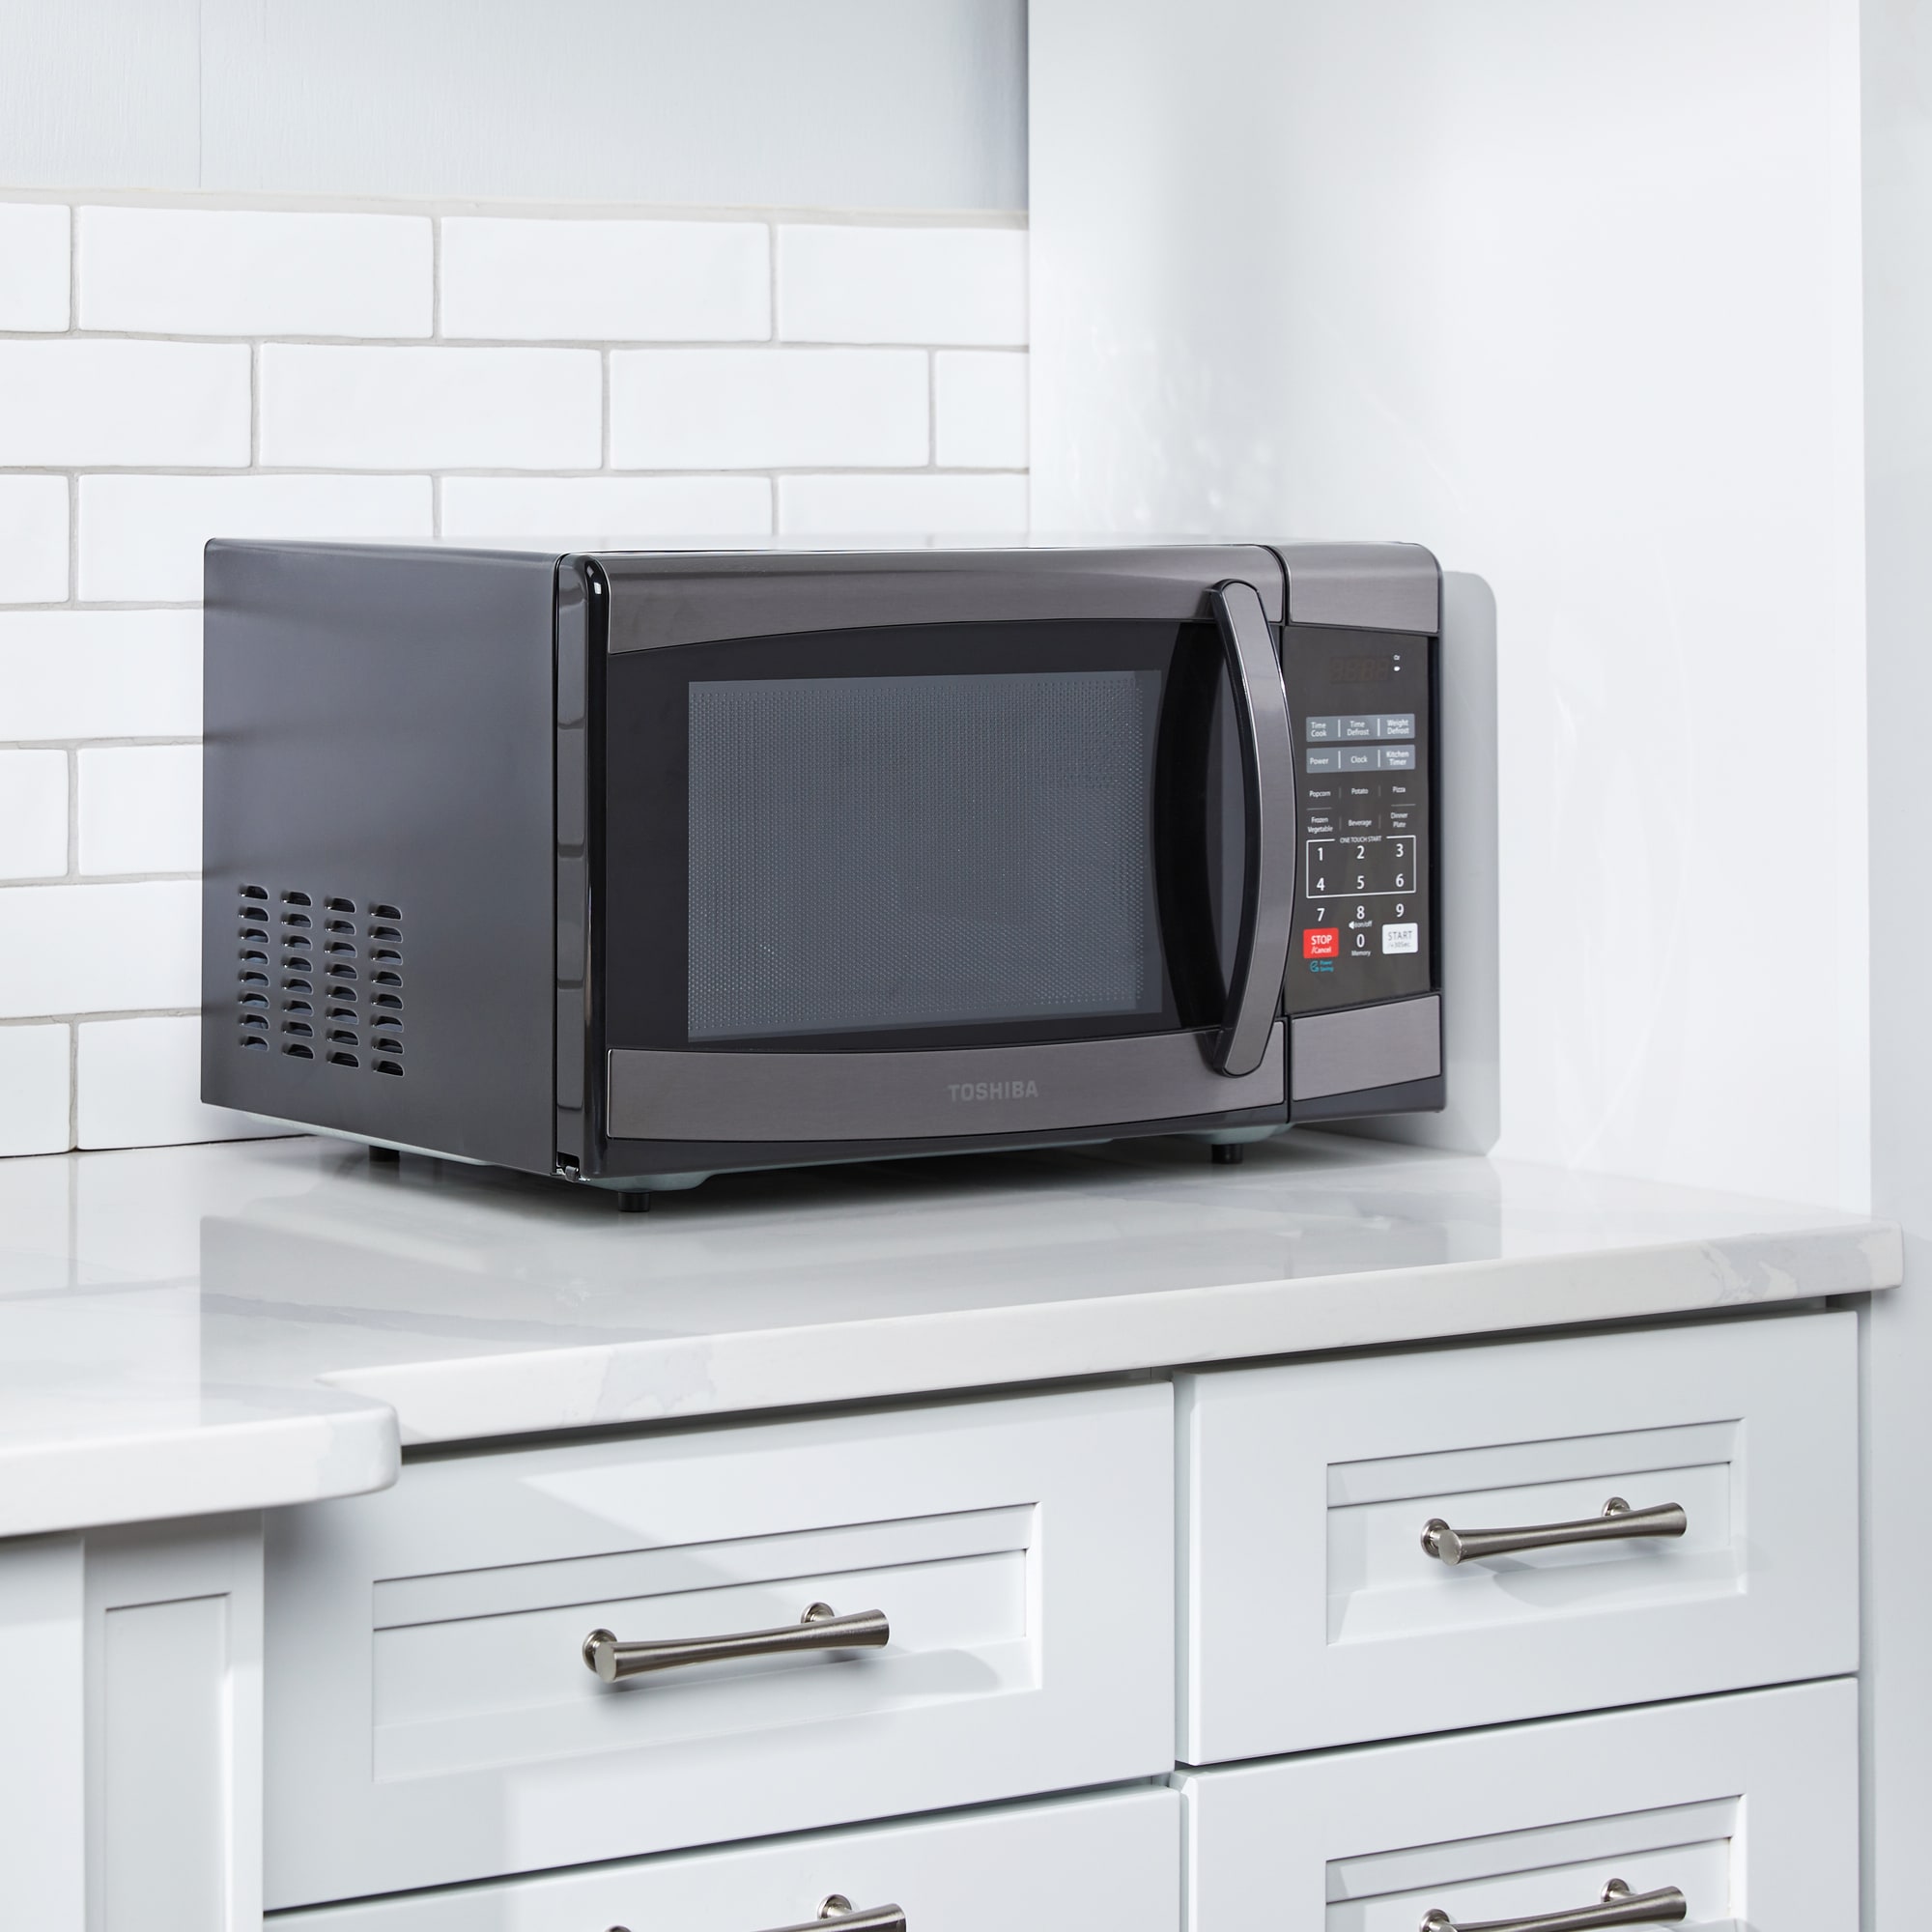 Toshiba 0.9 cu.ft. Stainless Steel Microwave